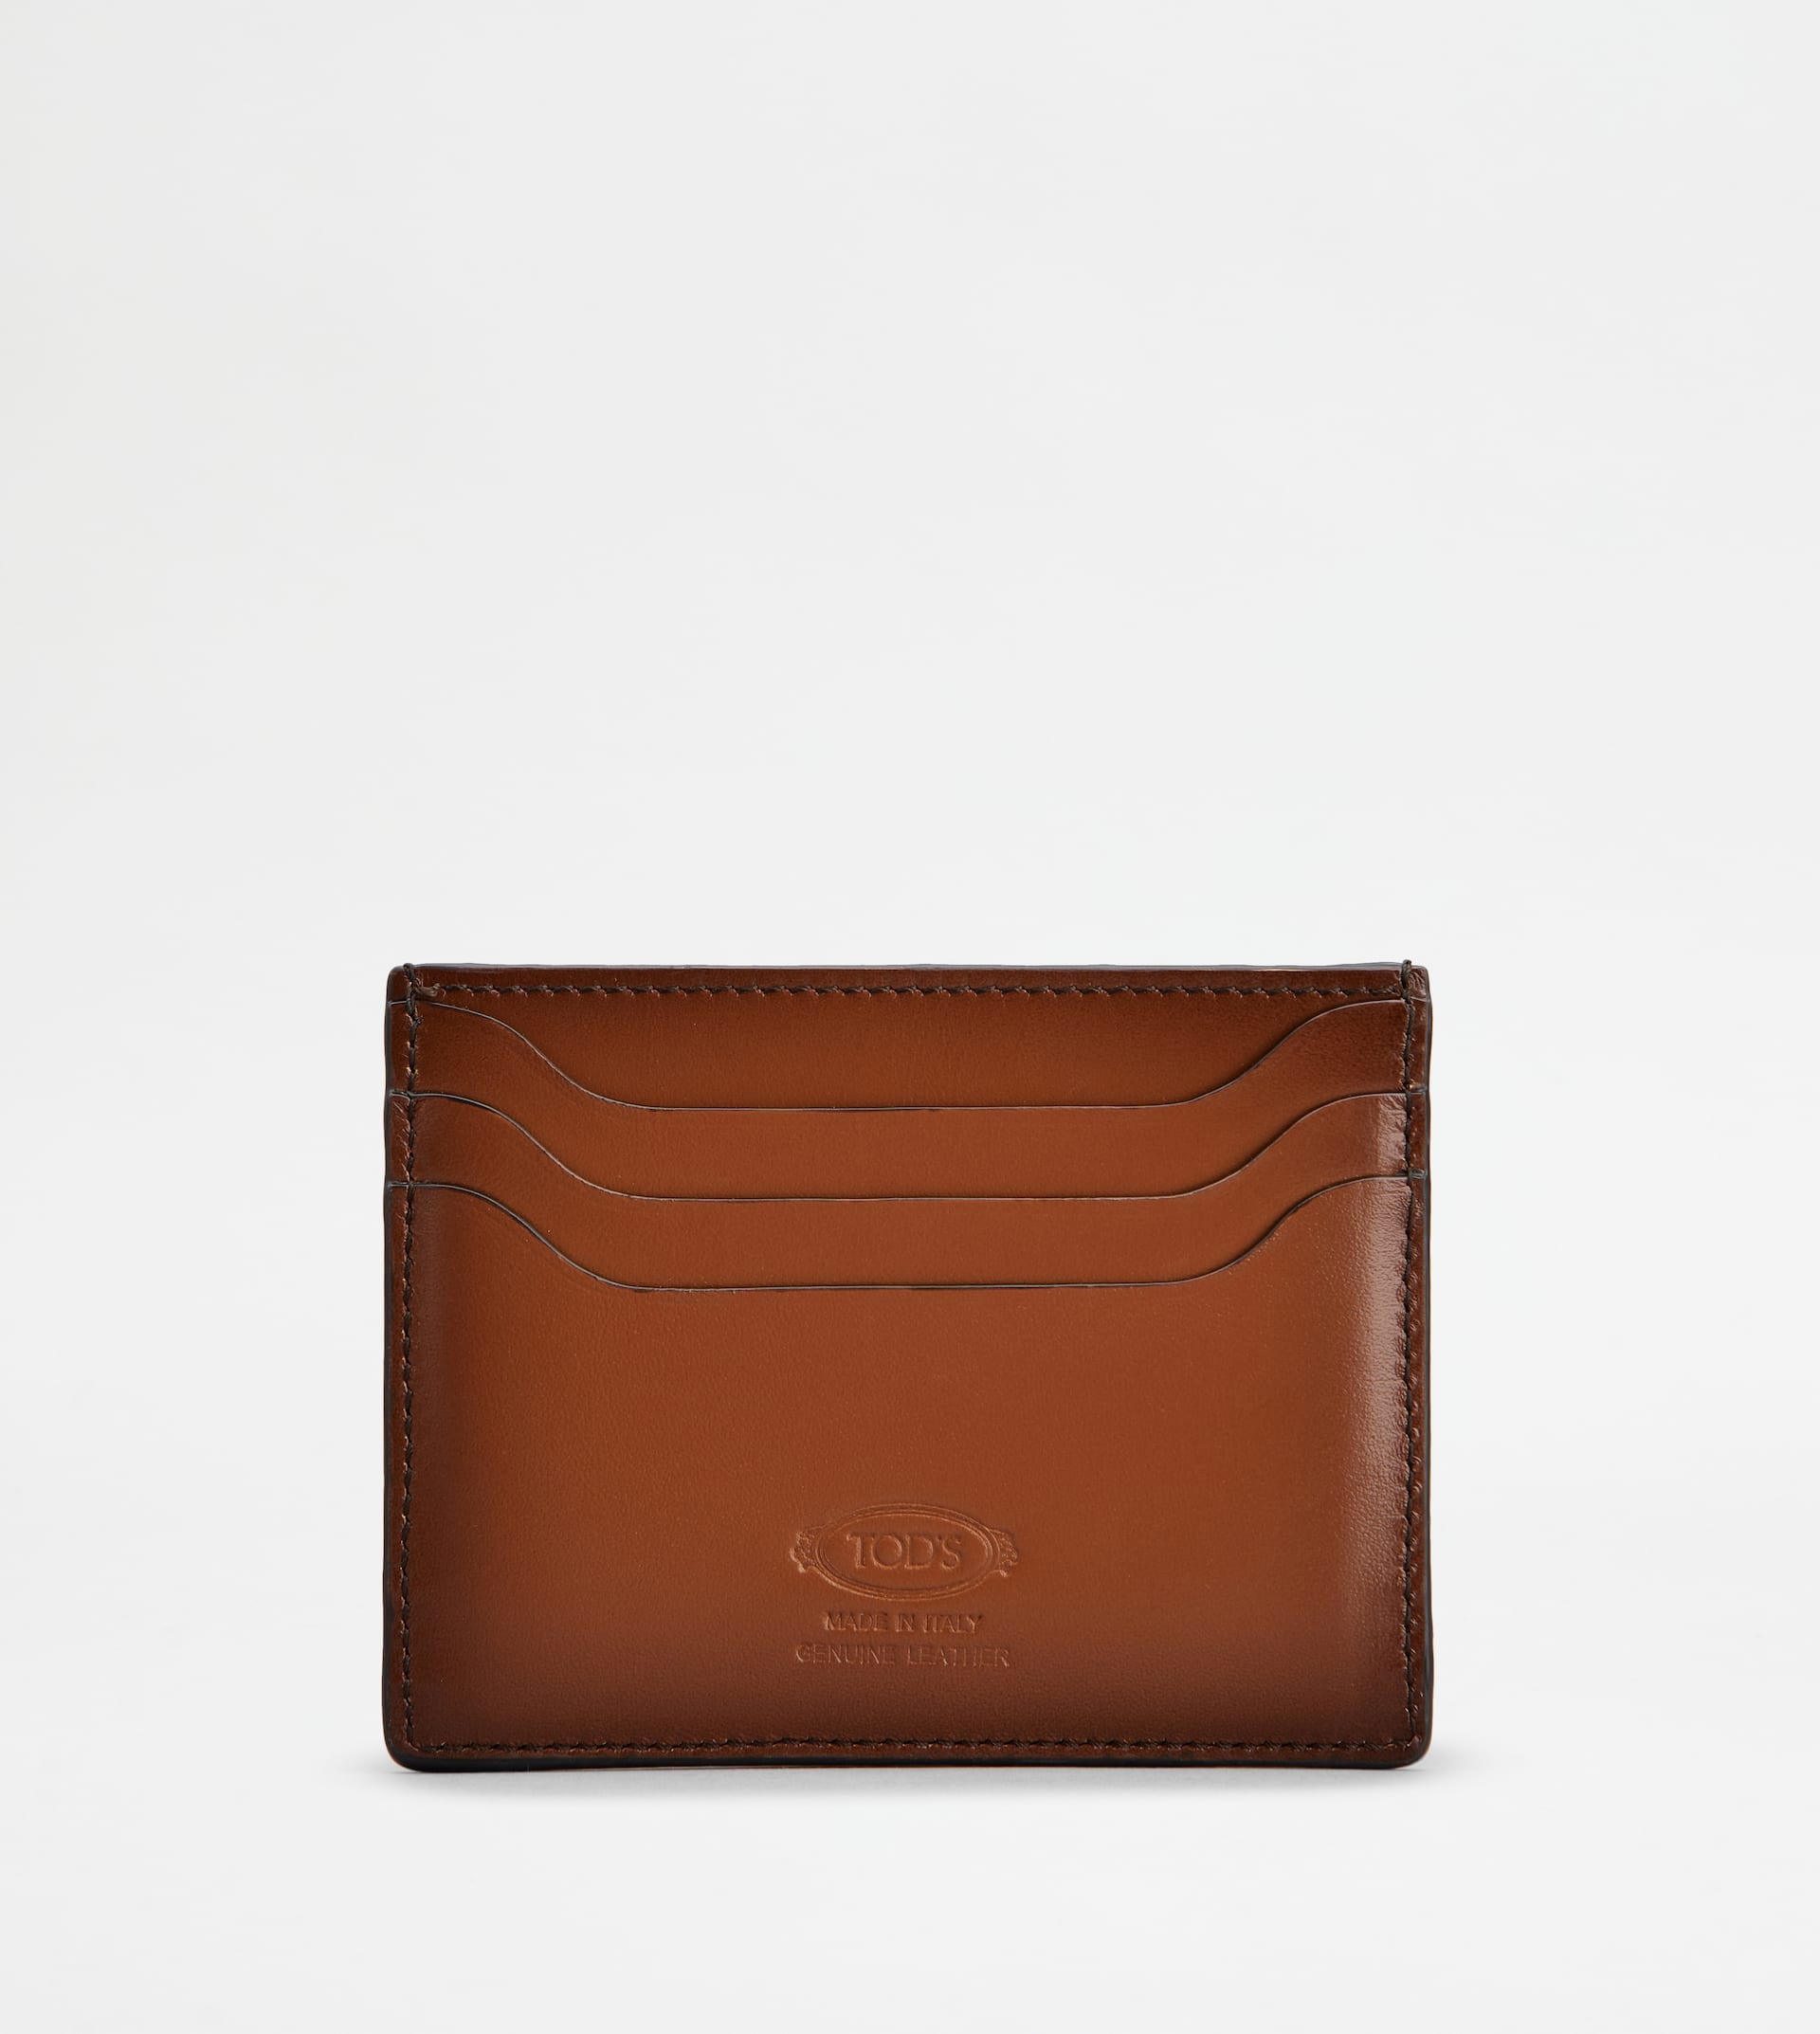 CREDIT CARD HOLDER IN LEATHER - BROWN - 2